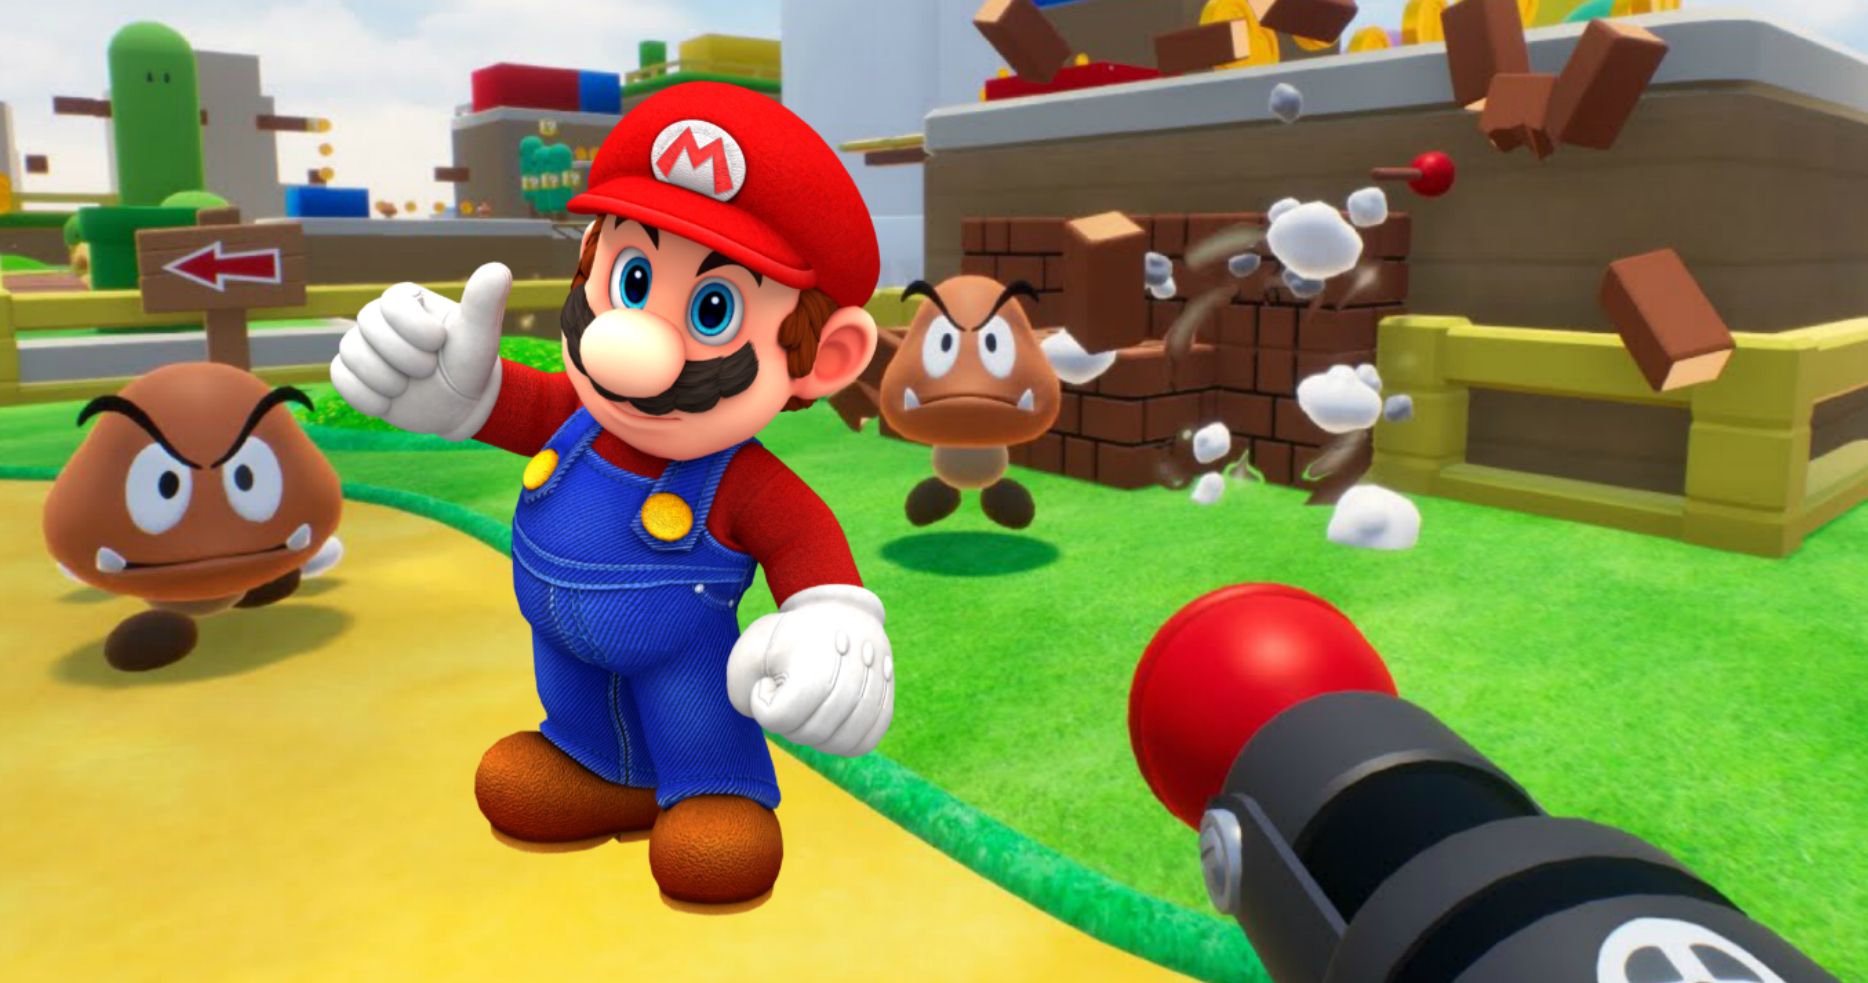 Super Mario Bros. First Person Shooter Created in Unreal Engine Is Free and It's Awesome